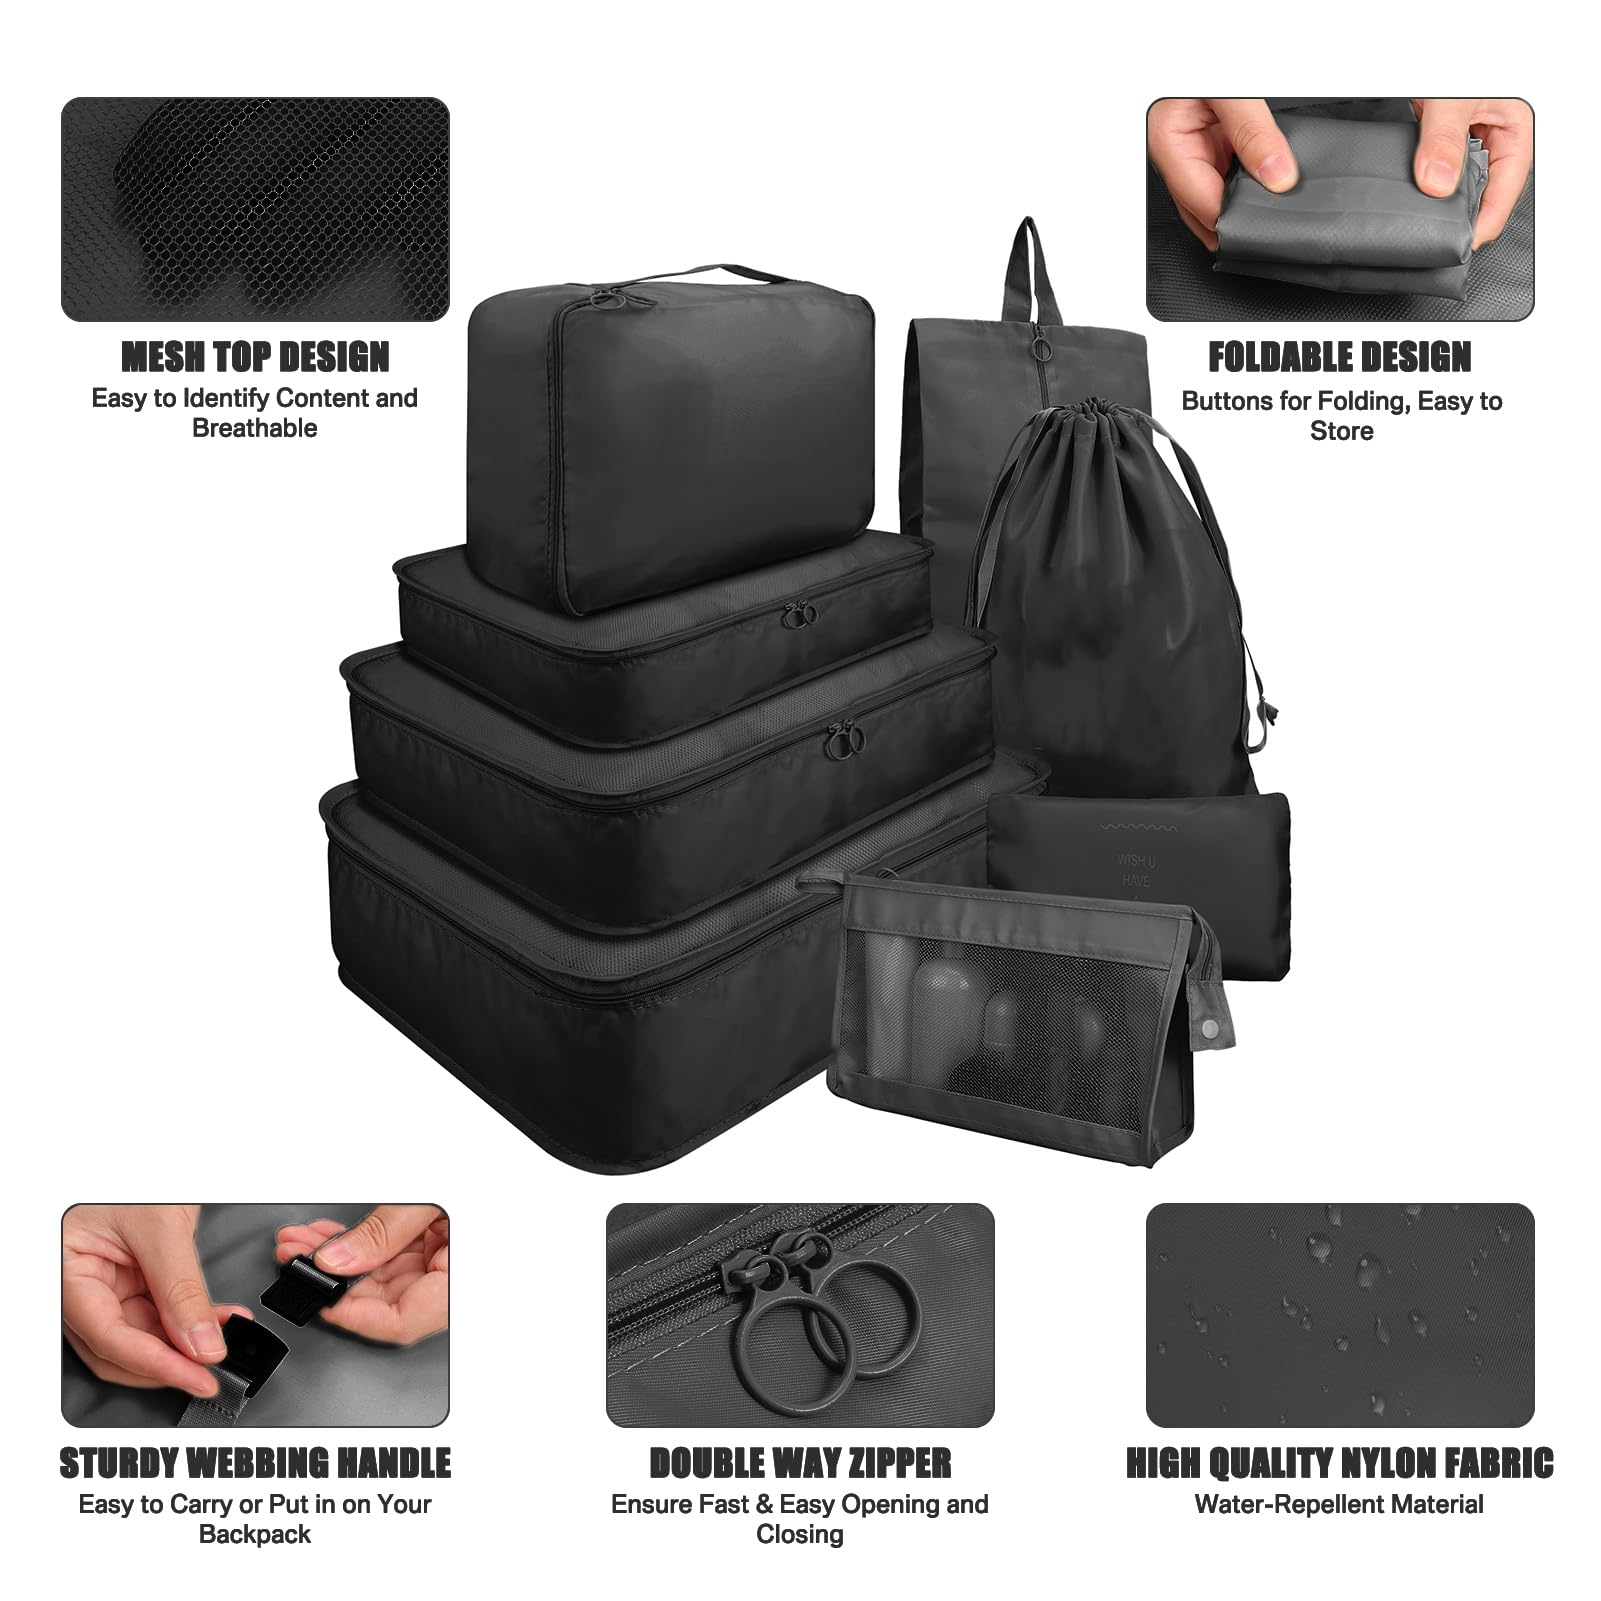 Travel-Ready Packing Cube Set Product Details